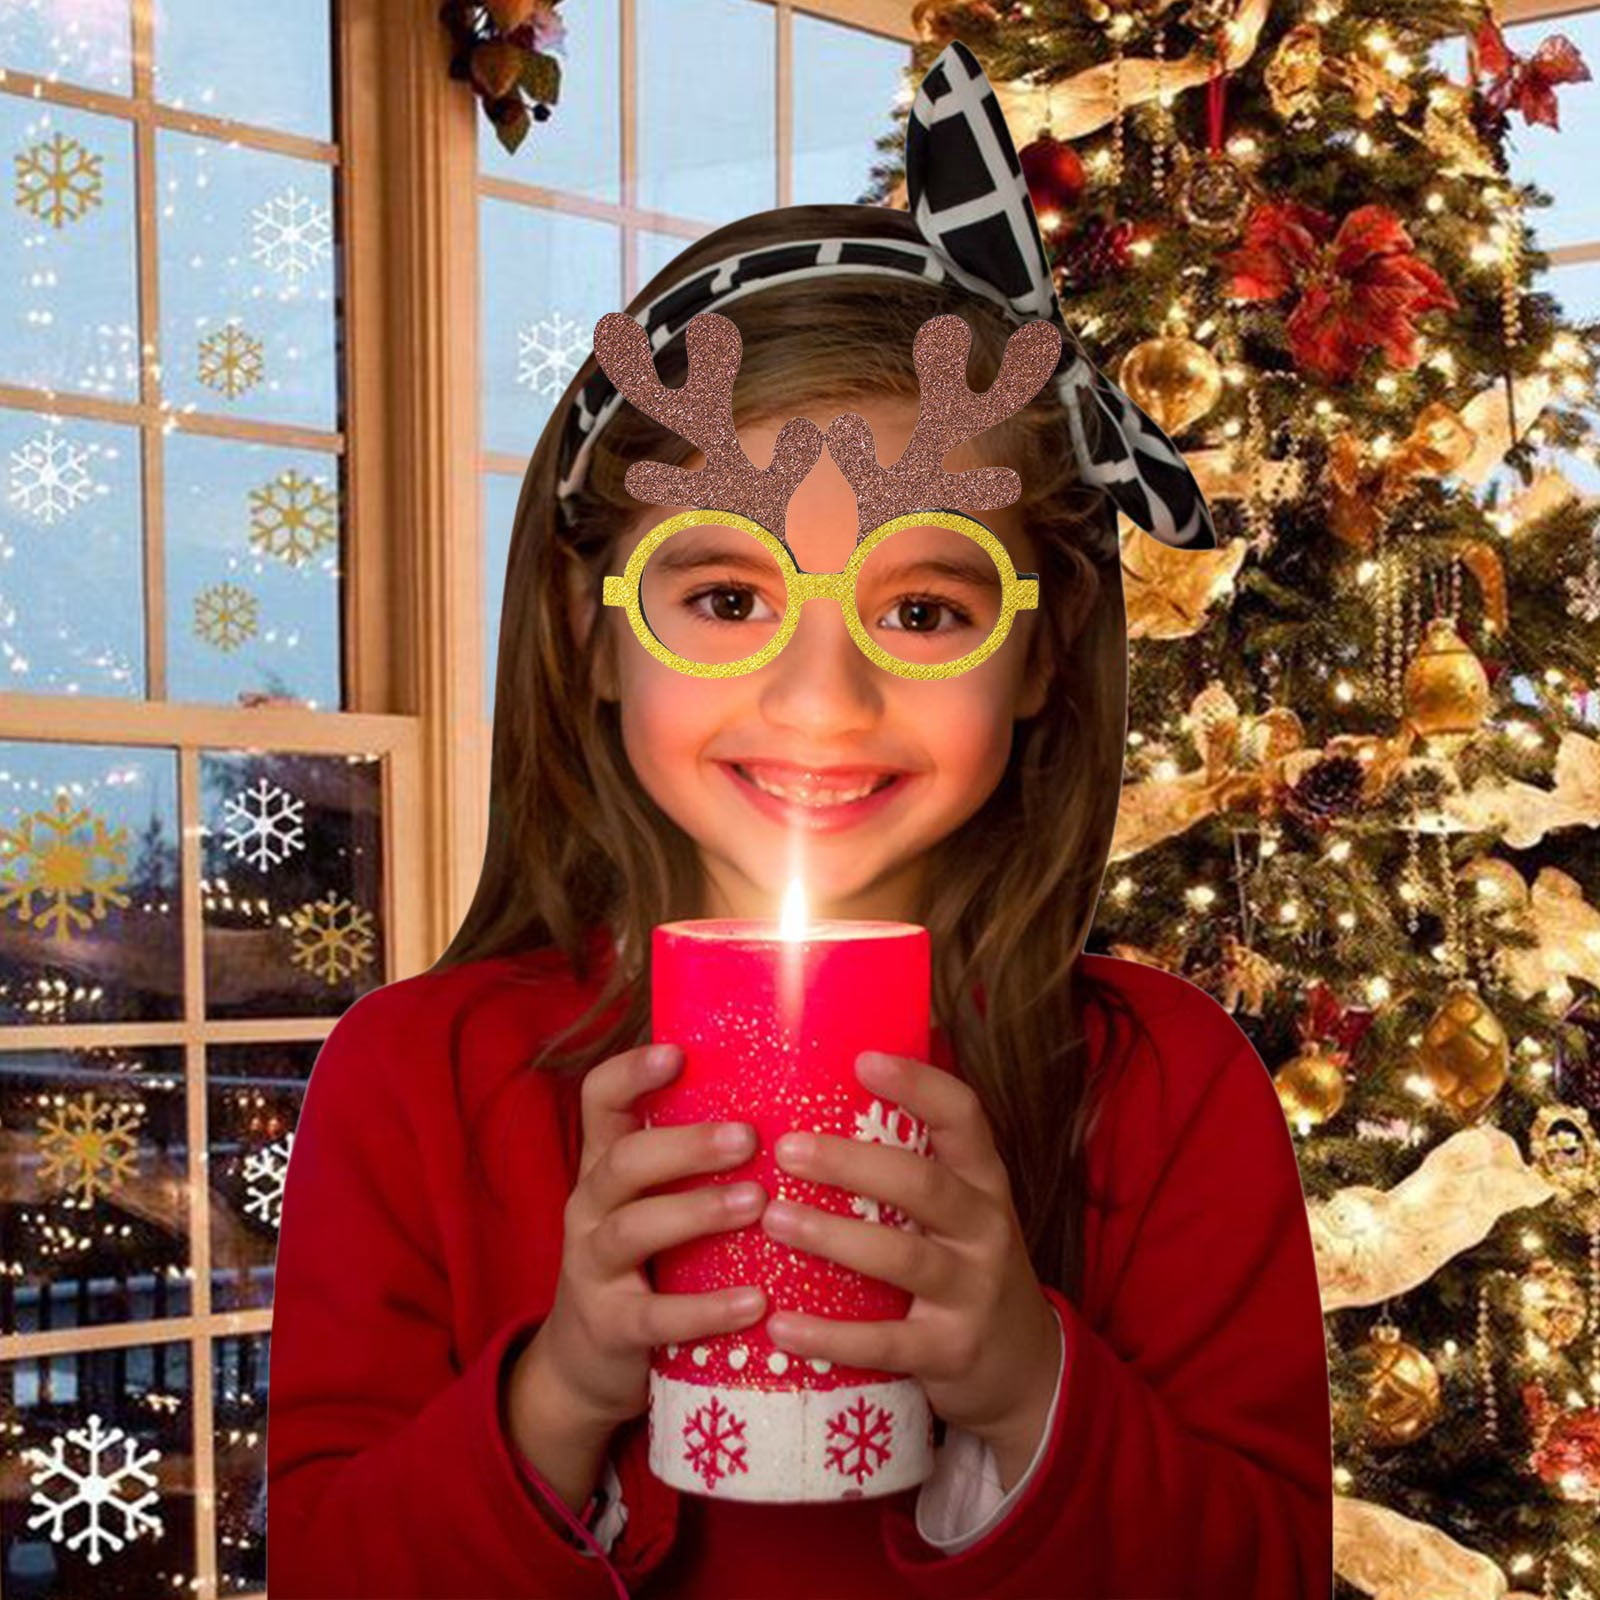 RBCKVXZ Under $5 Christmas Indoor Outdoor Decortions,Clearance,Christmas  Glasses Frame Stereo Glasses Adult And Children Decoration,Christmas Giftss